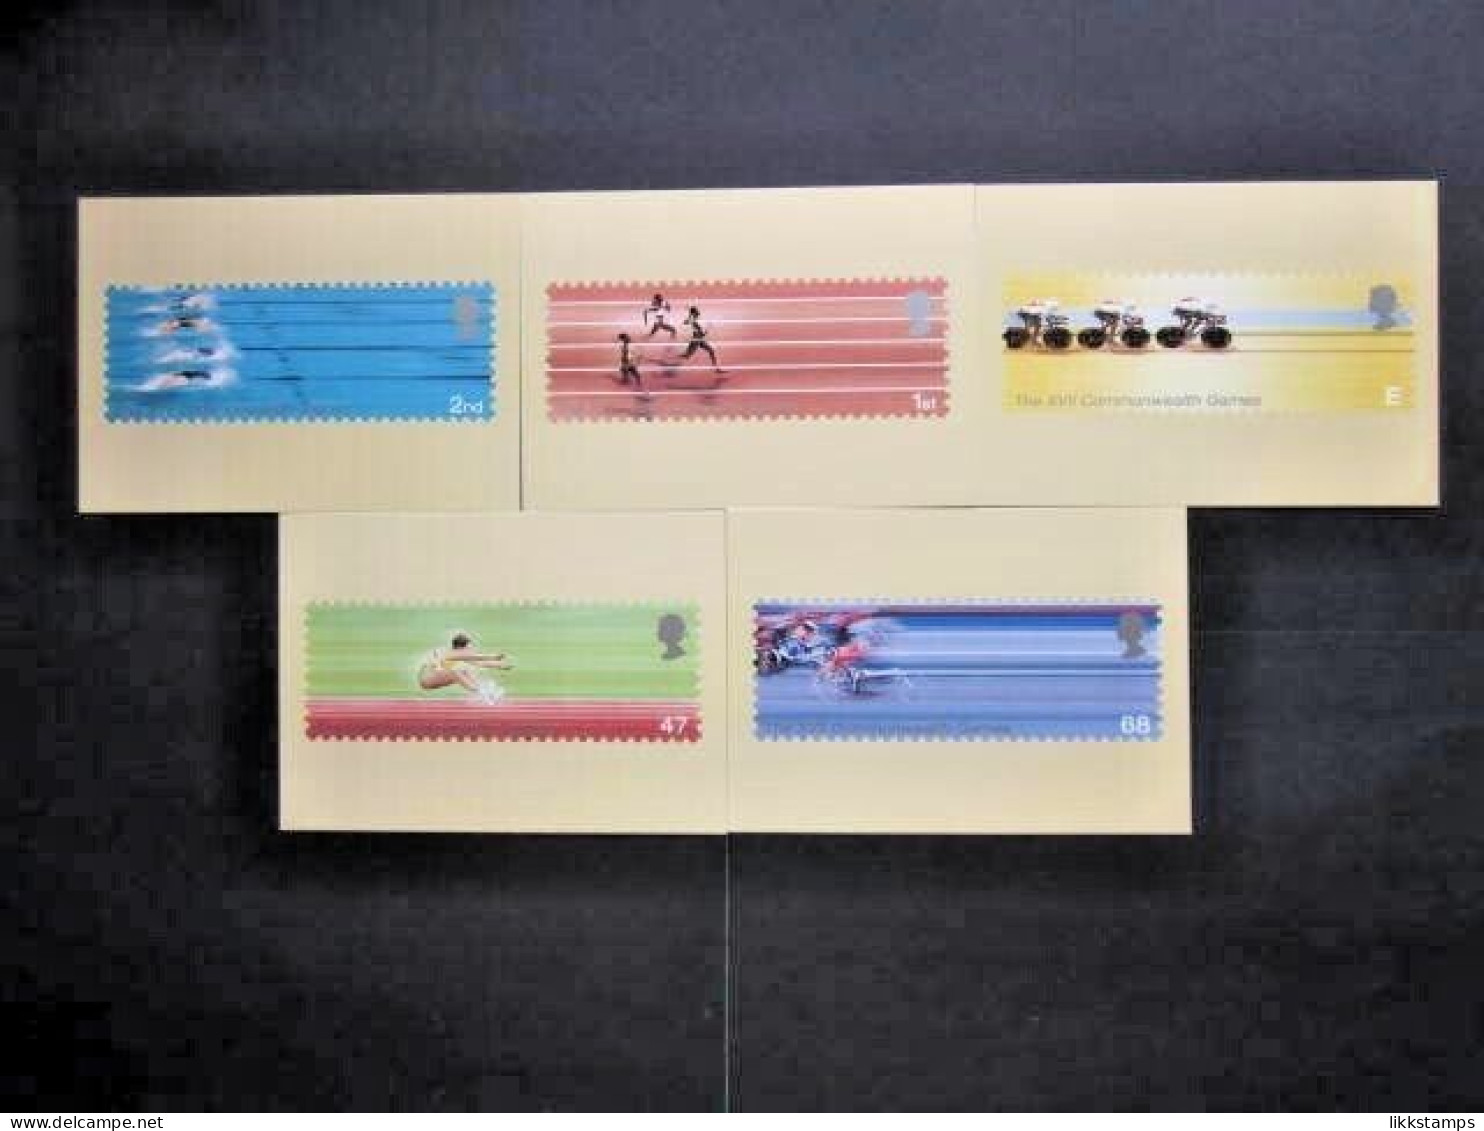 2002 THE 17th COMMONWEALTH GAMES P.H.Q. CARDS UNUSED, ISSUE No. 243 (B) #01701 - PHQ-Cards